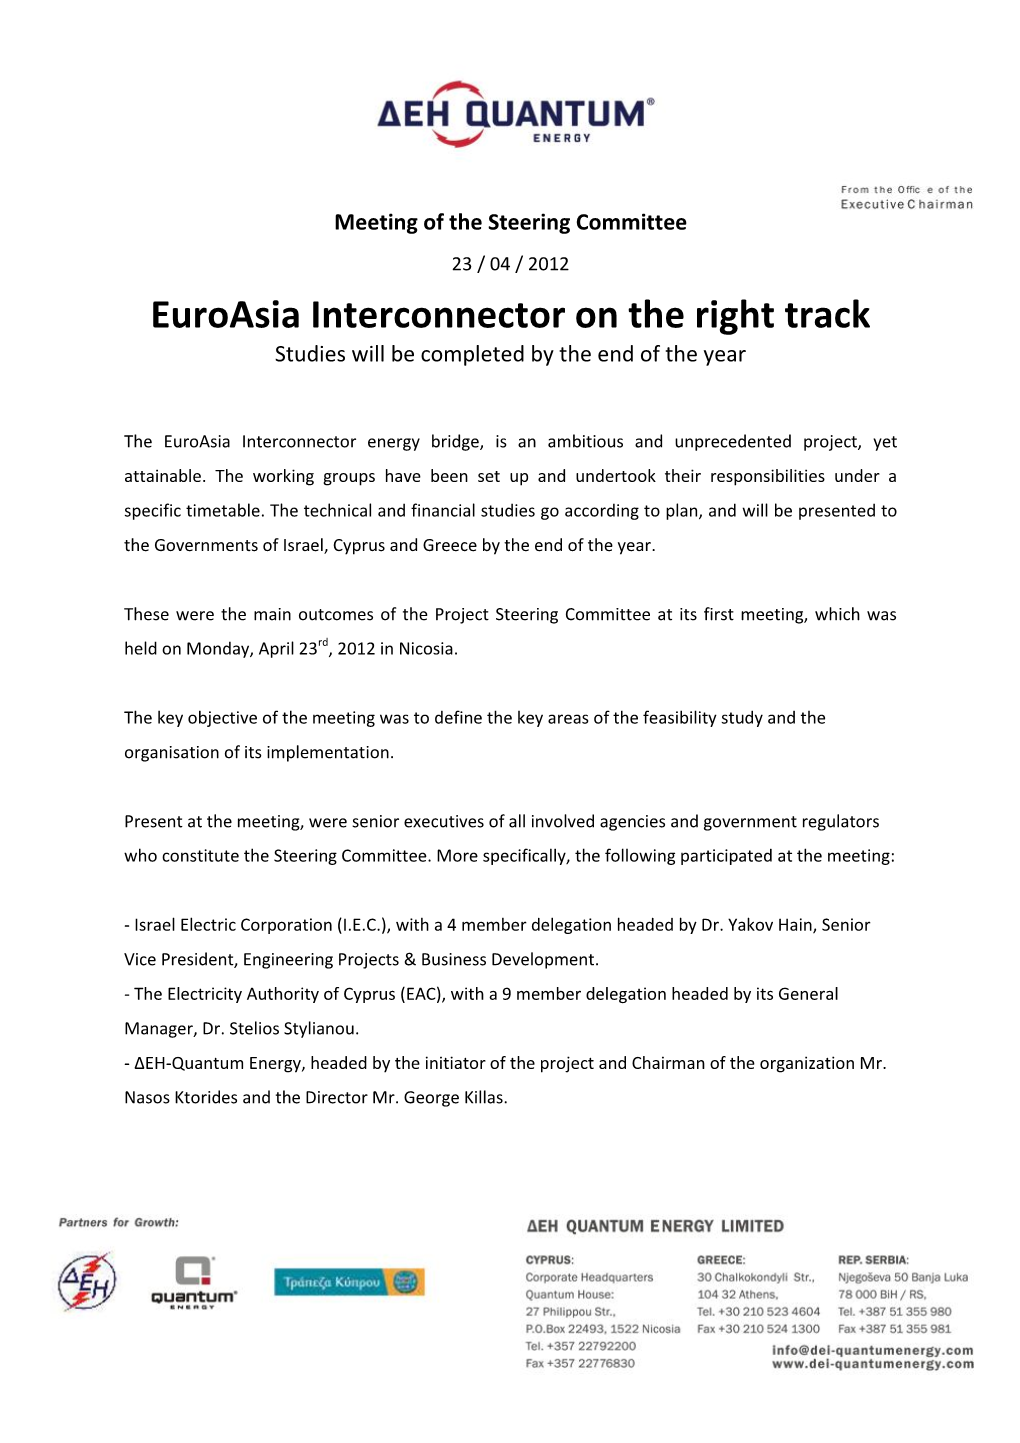 Euroasia Interconnector on the Right Track Studies Will Be Completed by the End of the Year